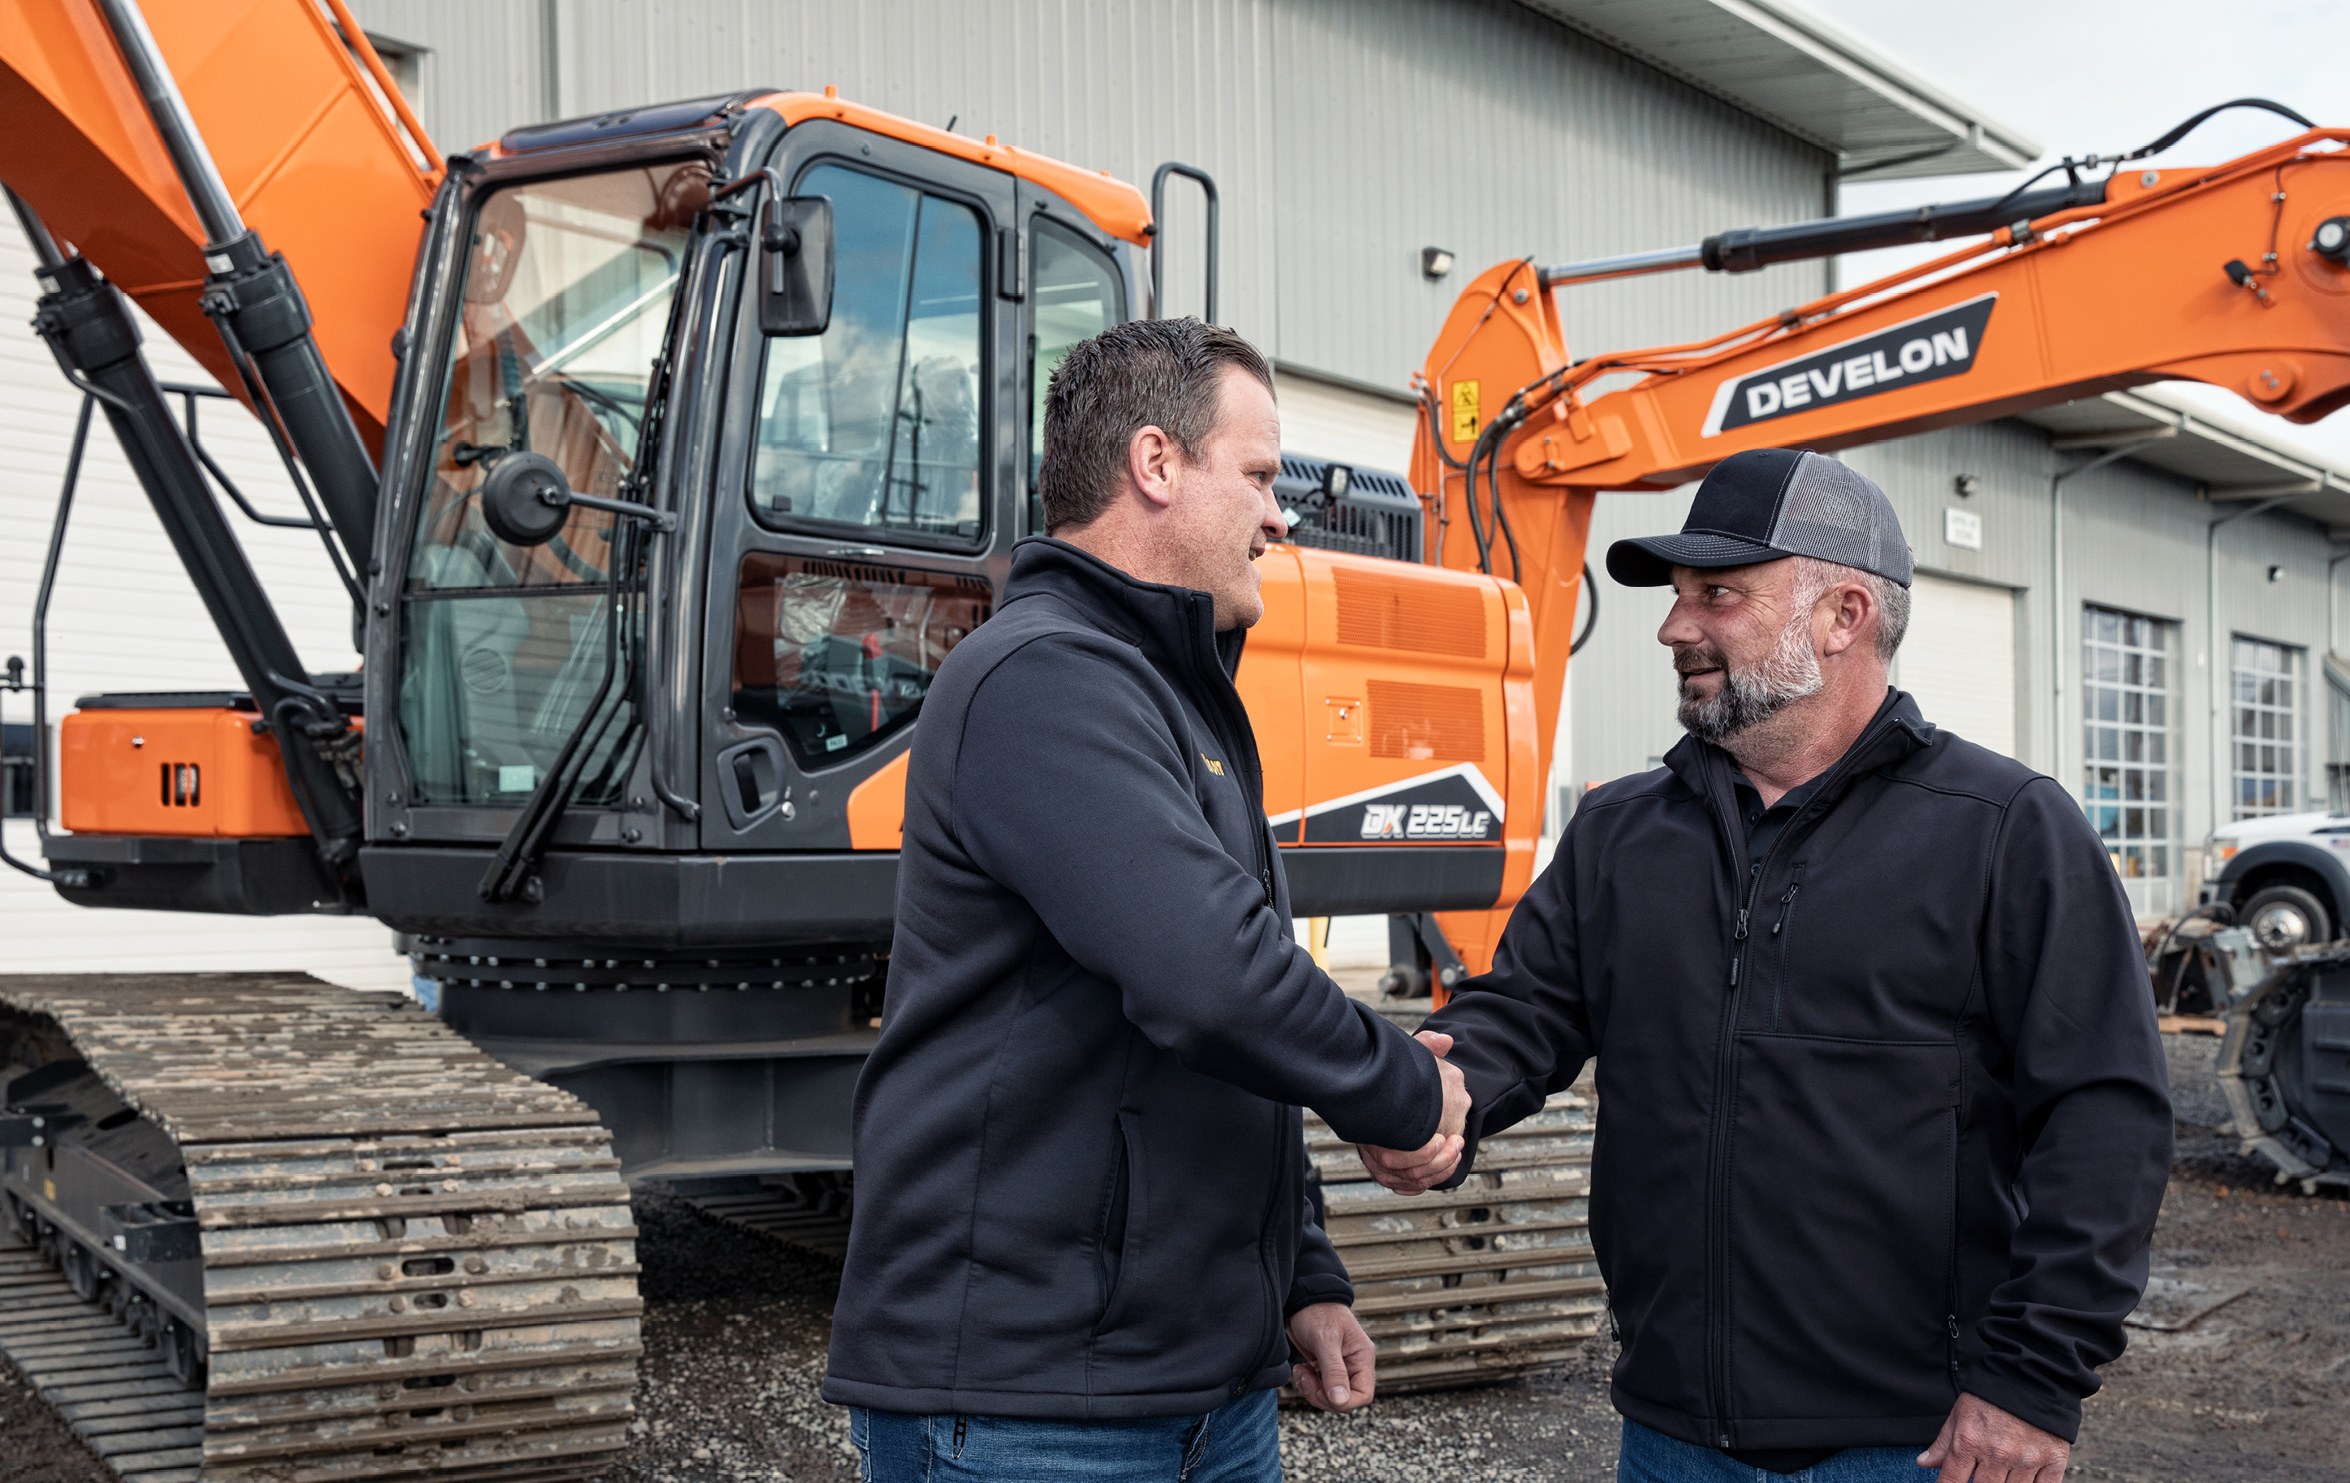 DEVELON National Accounts Team member and rental company owner shaking hands in front of a DEVELON excavator.